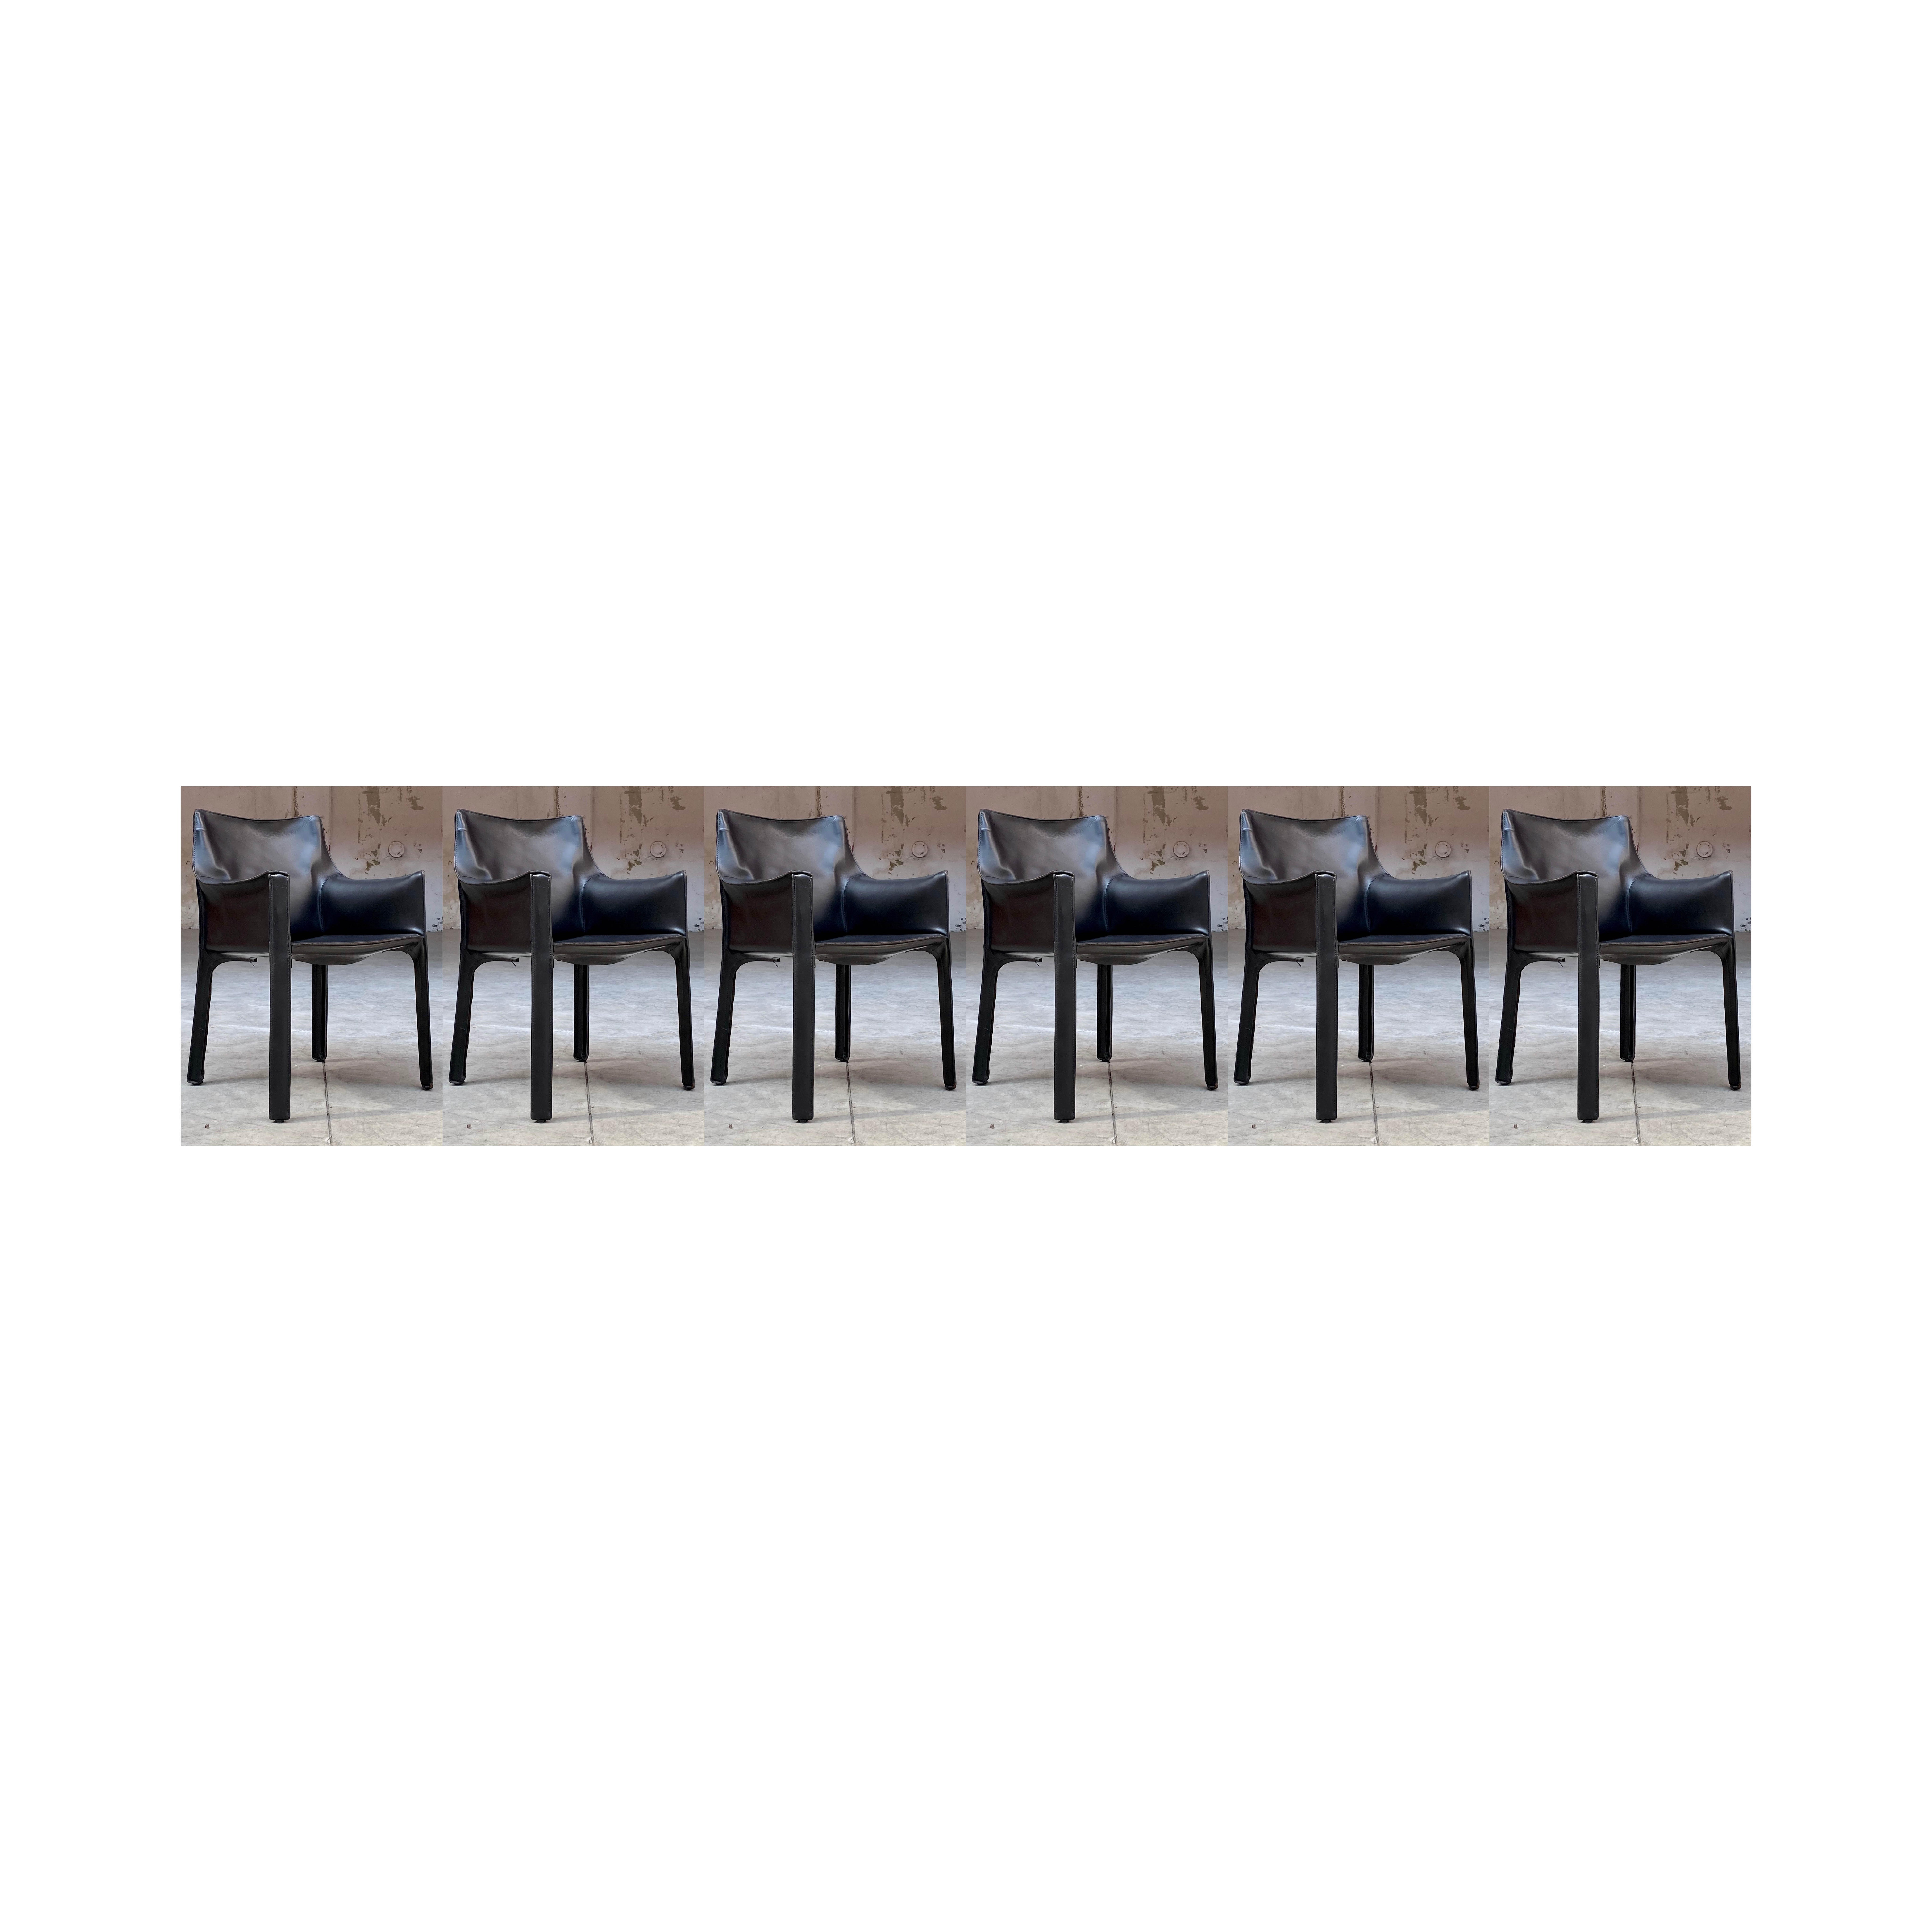 Mario Bellini "CAB 413" Chairs for Cassina in Black, 1977, Set of 6